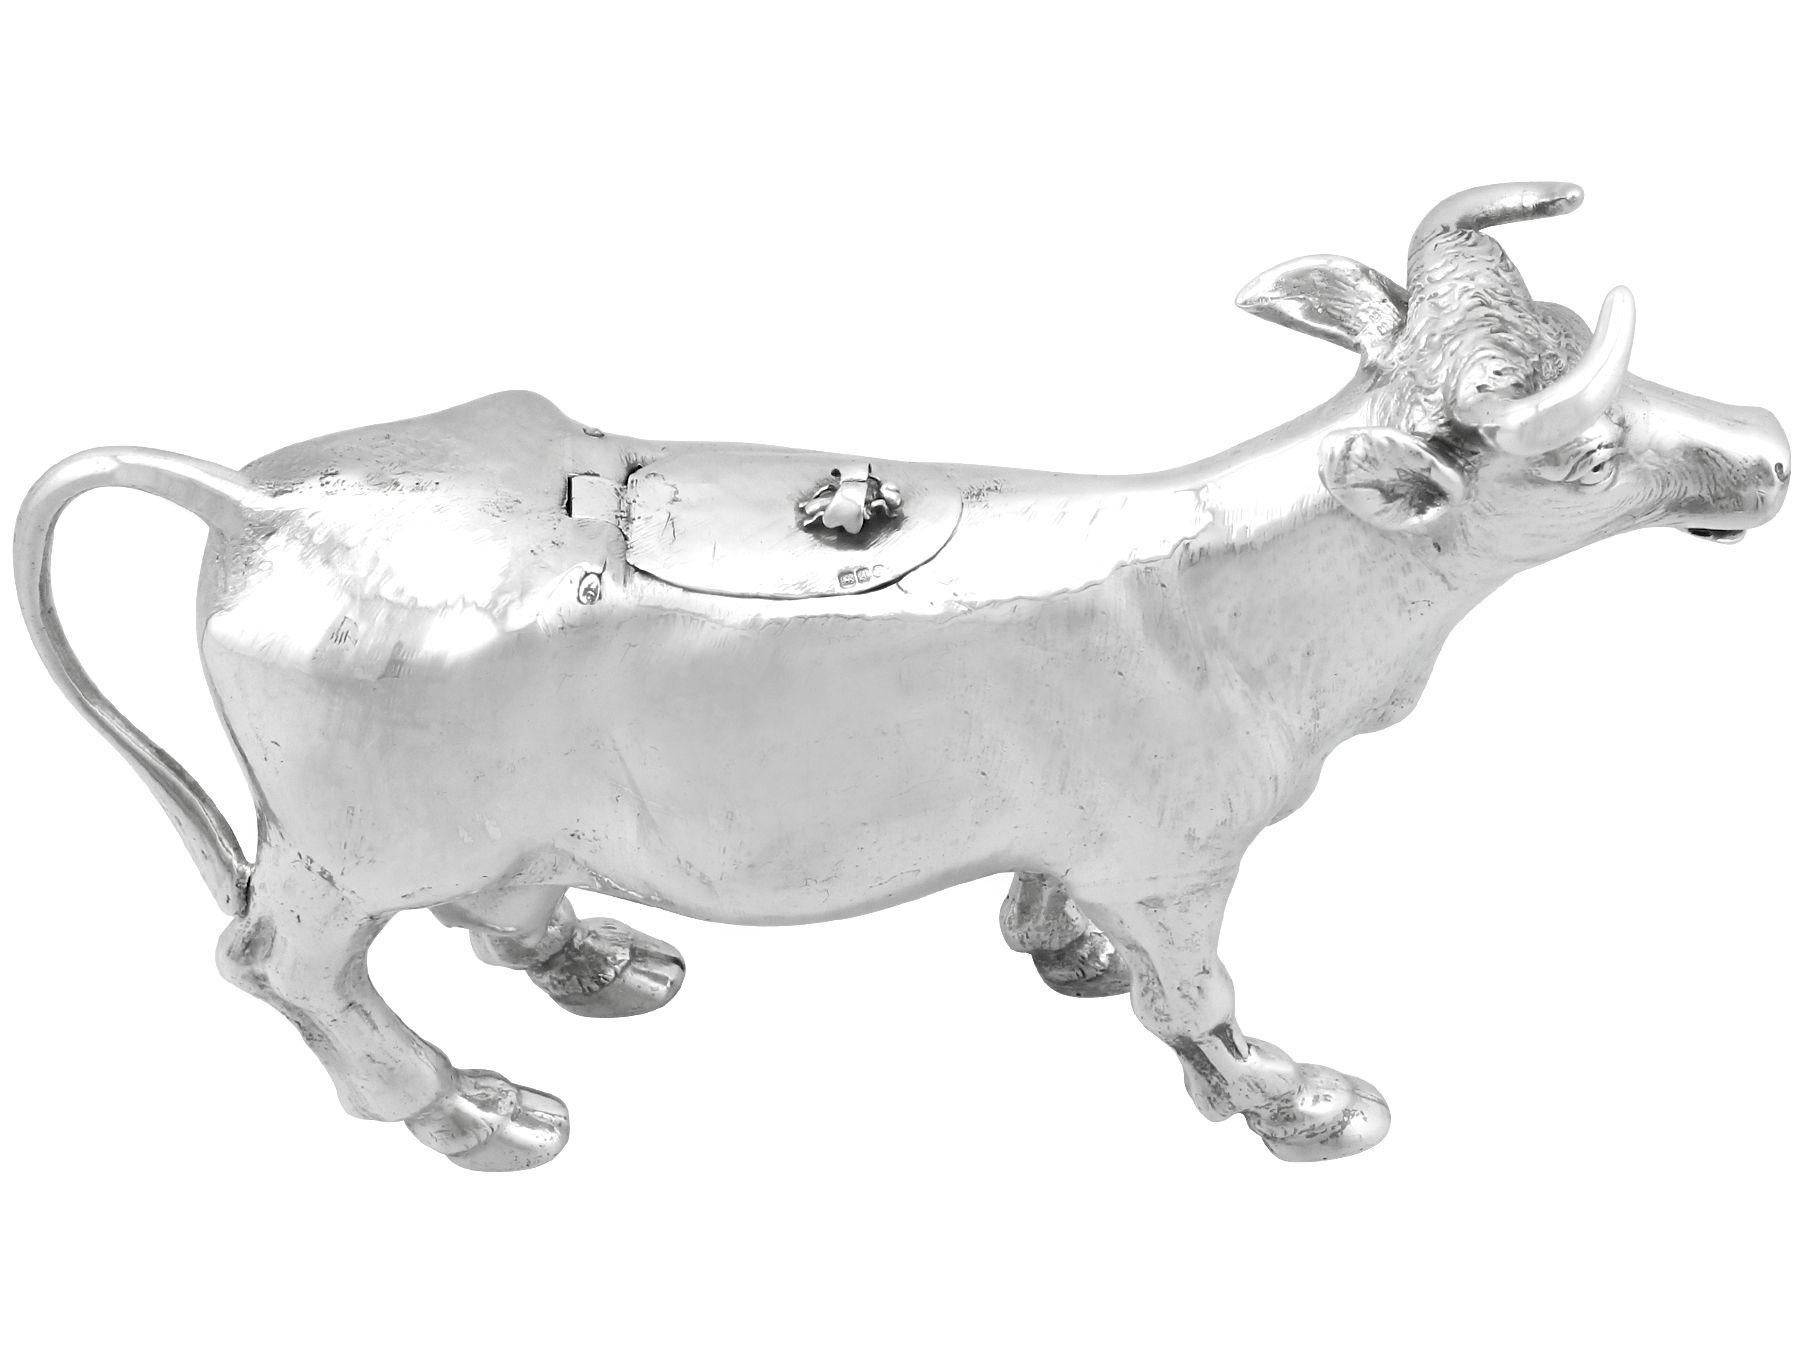 An exceptional, fine and impressive, large antique German sterling silver cow creamer made by B. Neresheimer & Söhne; an addition to our silverware collection

This exceptional and large antique cast sterling silver creamer has been realistically